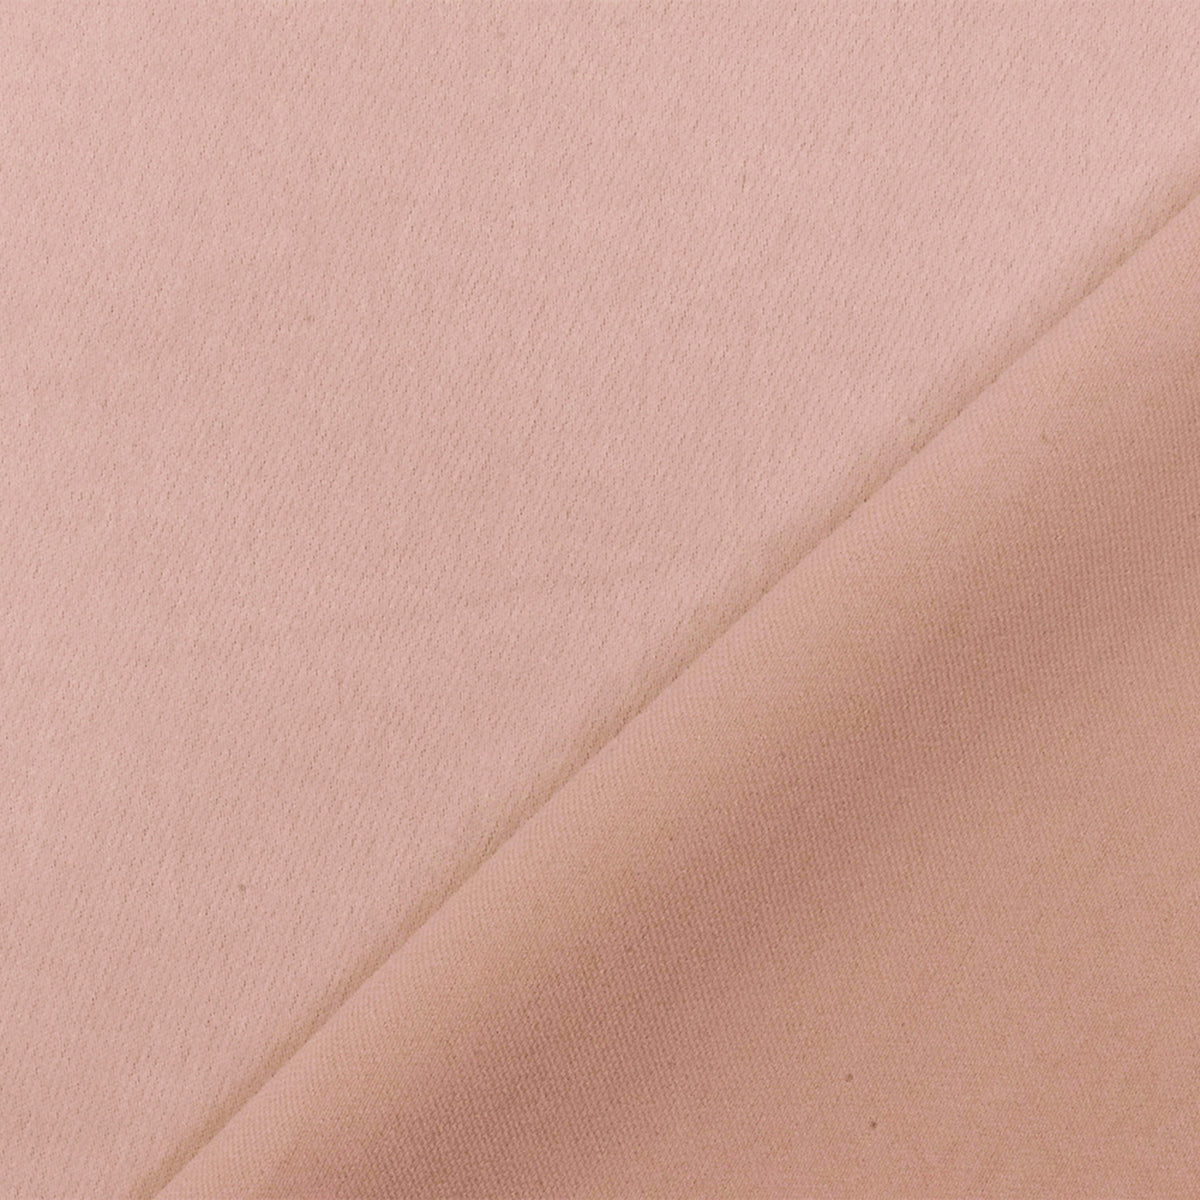 Soft Pink Famous Designer Polyester Vintage Satin Woven Fabric ...